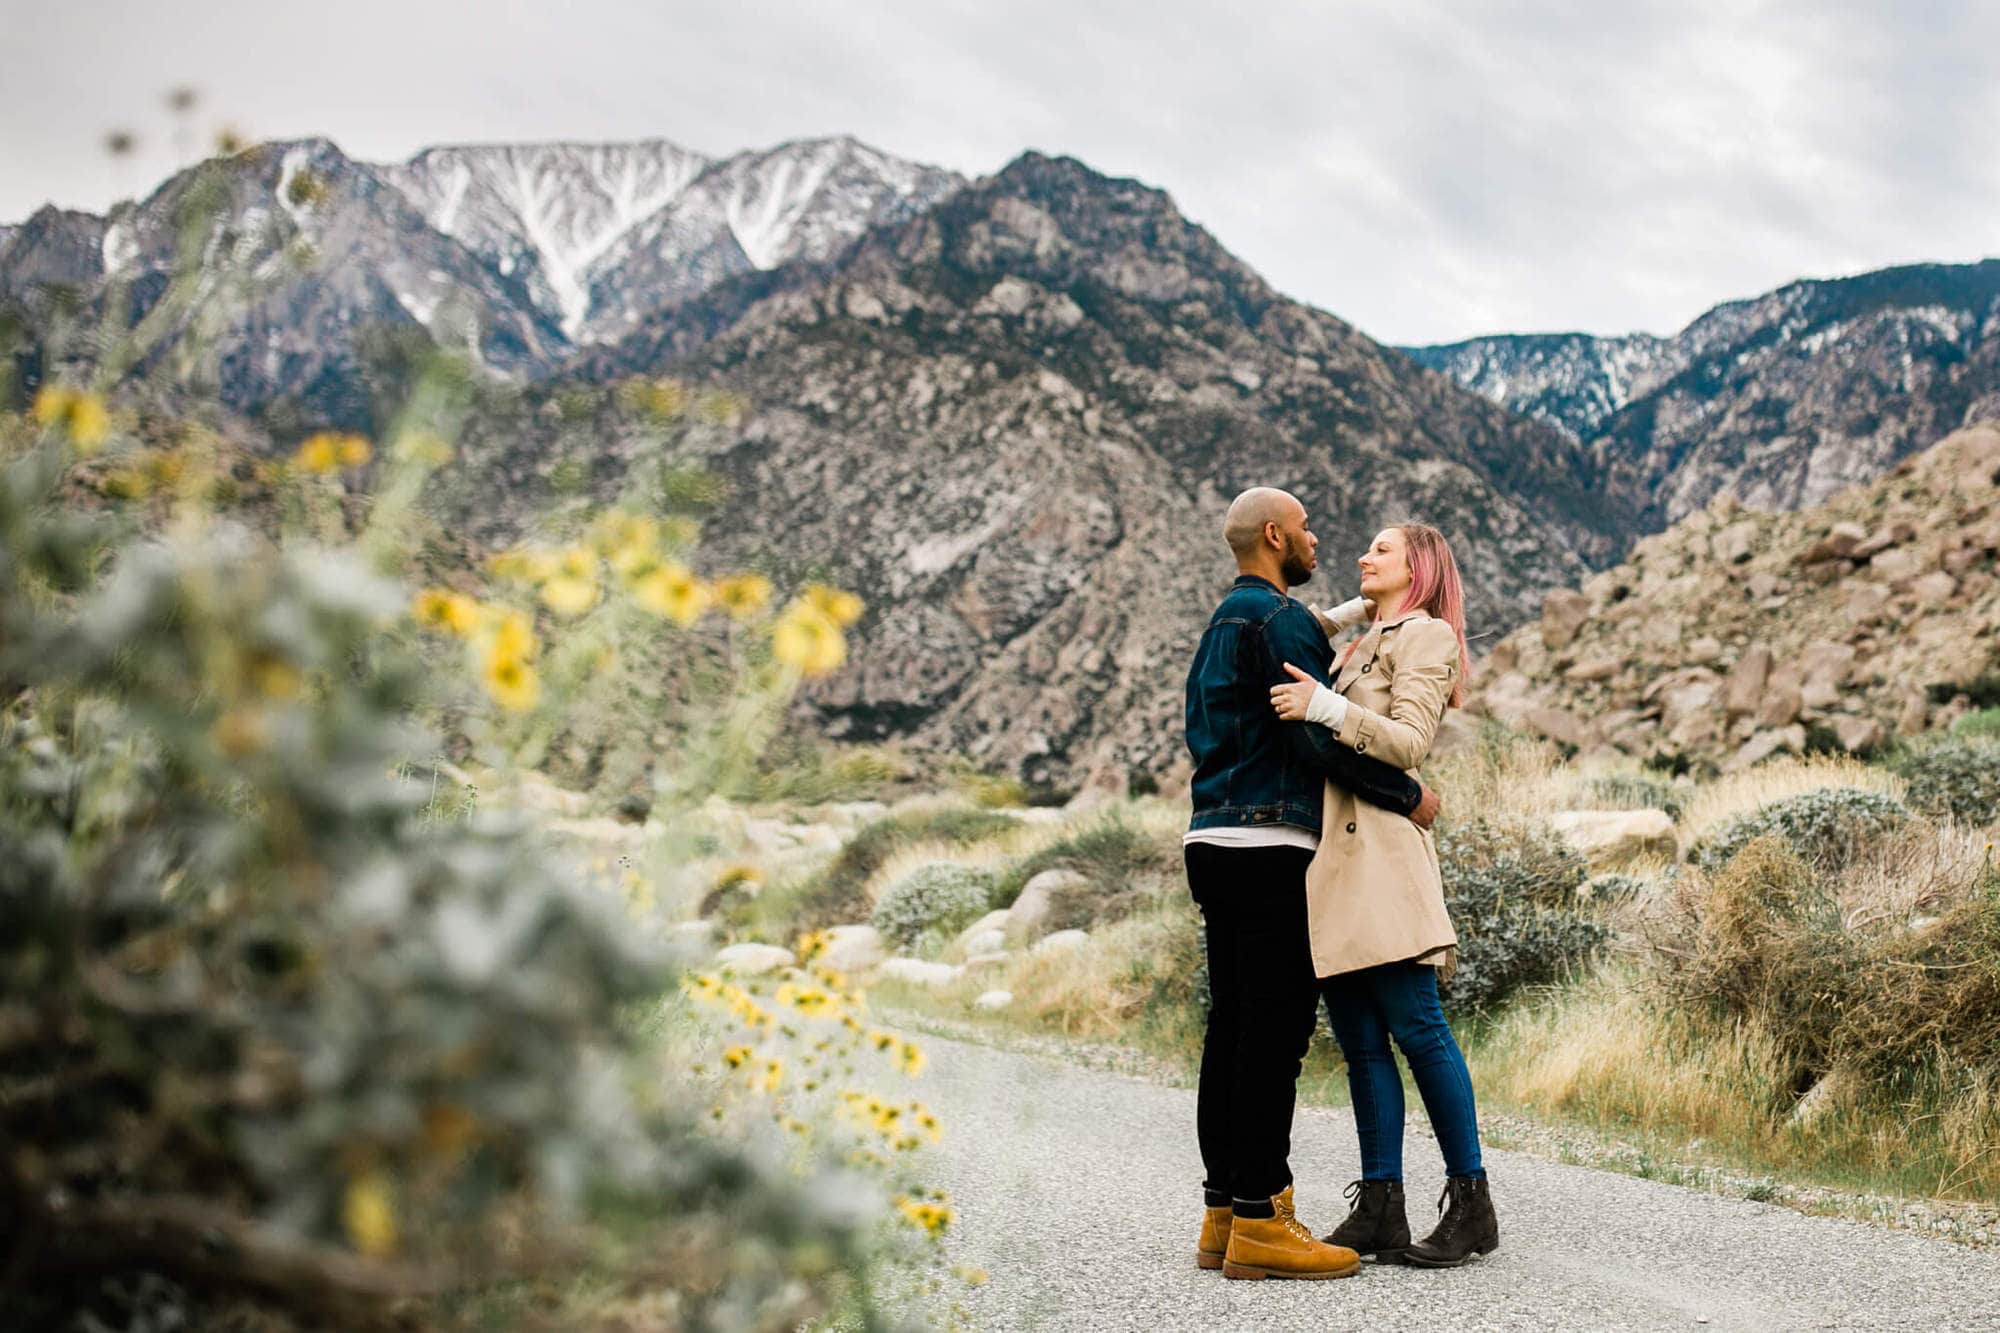 Want epic mountian engagement photos? These mountain engagement photos on the Pacific Crest Trail are the perfect adventerous engagement photo inspiration.